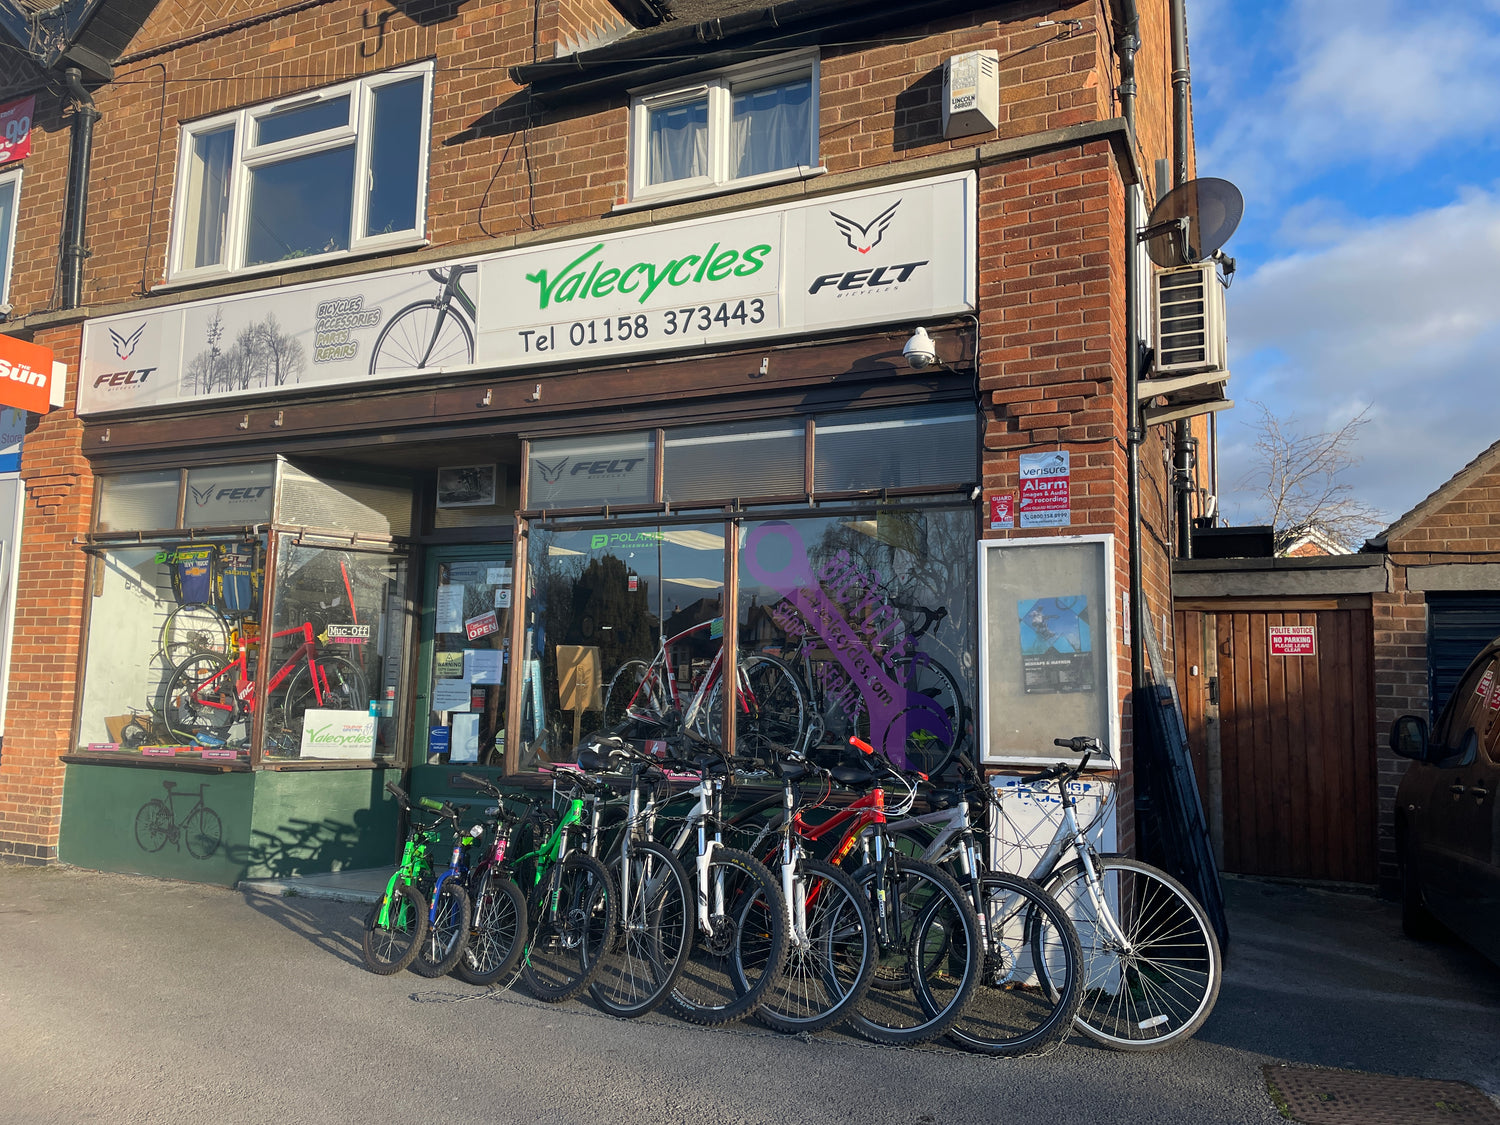 Valecycles - Great bikes for sale